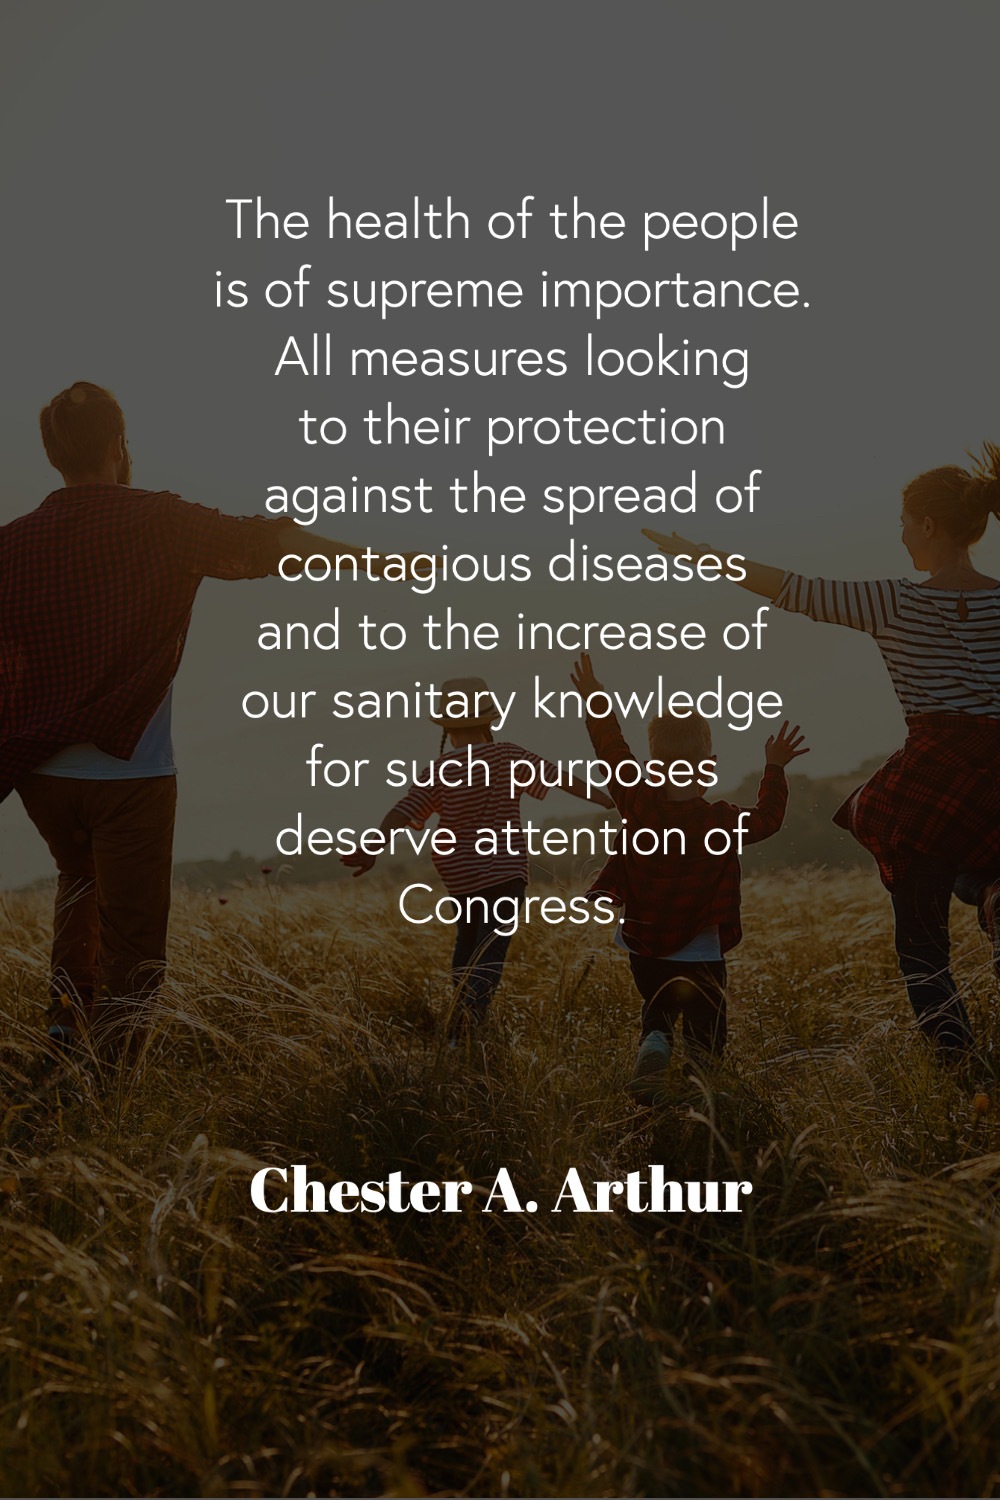 Quote by Chester A. Arthur